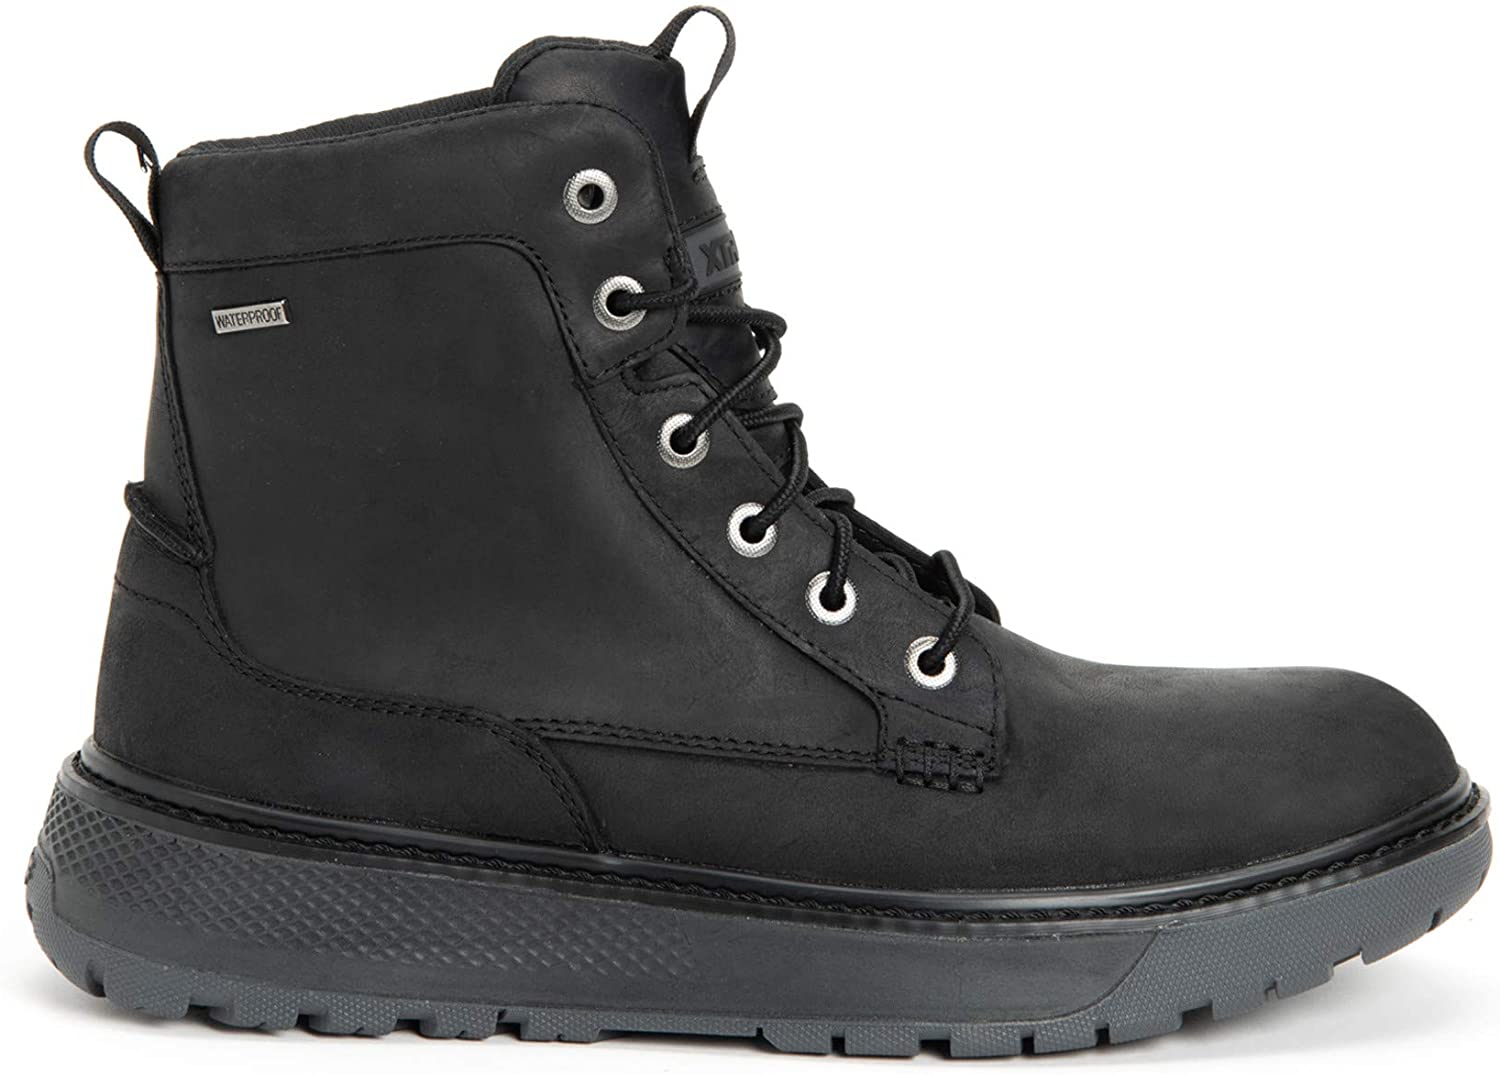 Men's Xtratuf Bristol Bay Work Boot in Black from the side